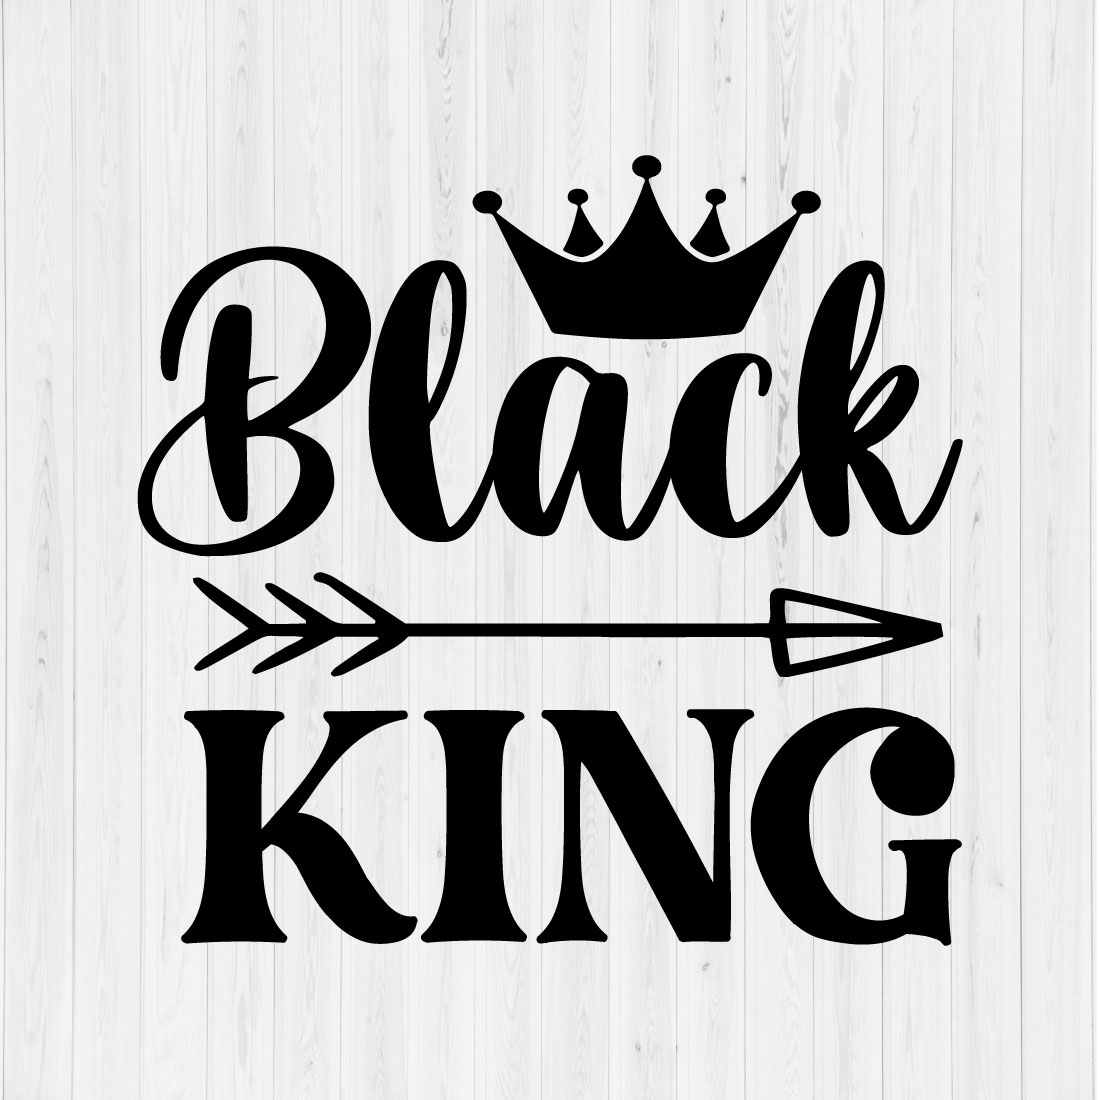 Black King preview image.